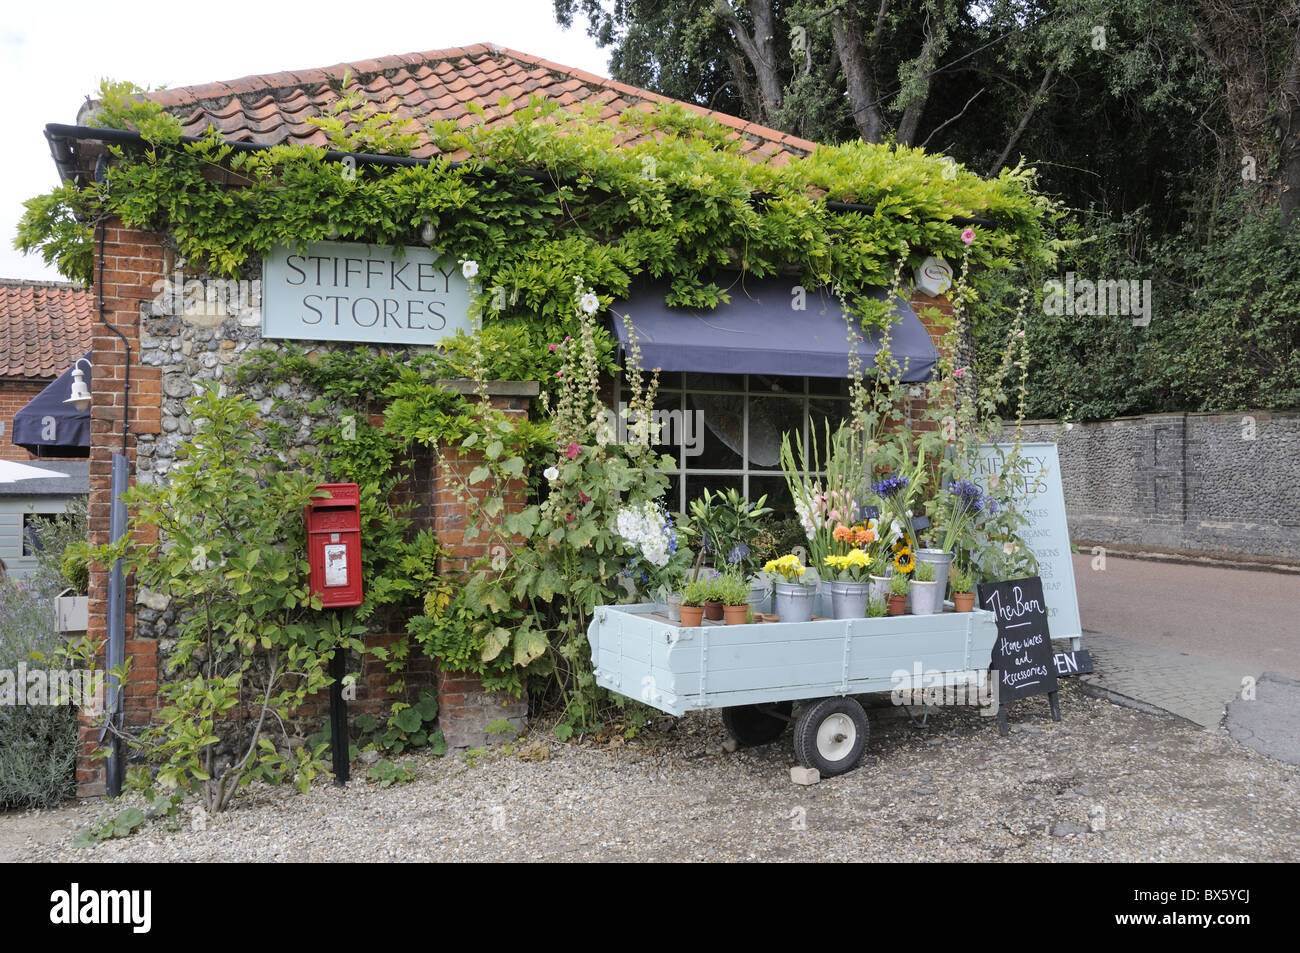 Village stores and post office with flowers for sale outside, Stiffkey, Norfolk, Uk, August Stock Photo